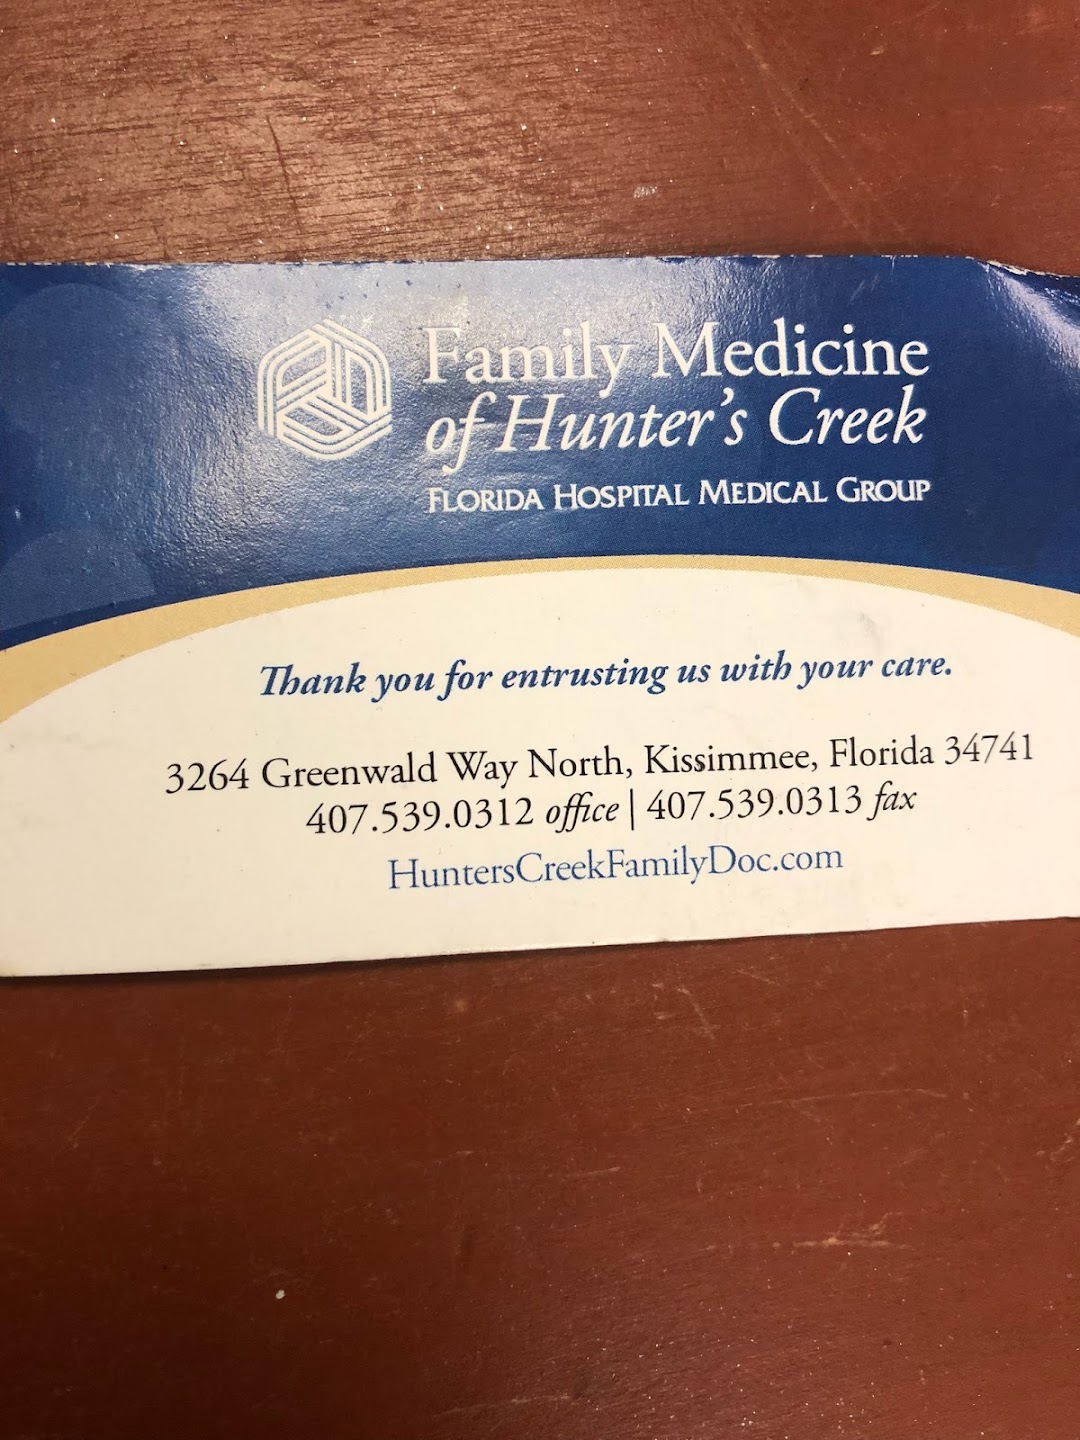 AdventHealth Medical Group Family Medicine at Hunters Creek